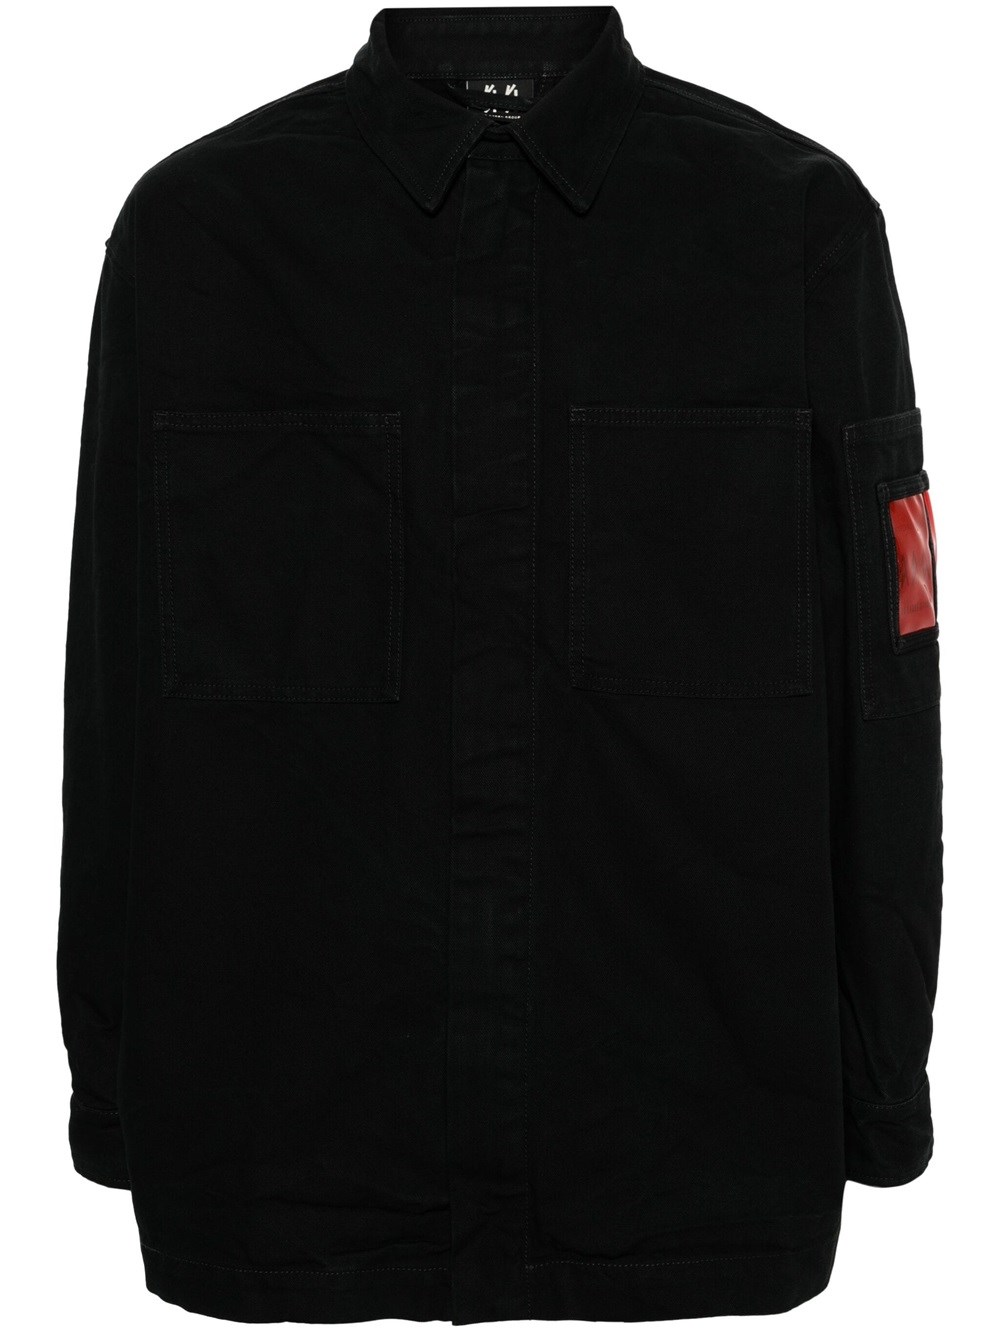 44 LABEL GROUP COTTON OVERSHIRT FOR HANGOVERS